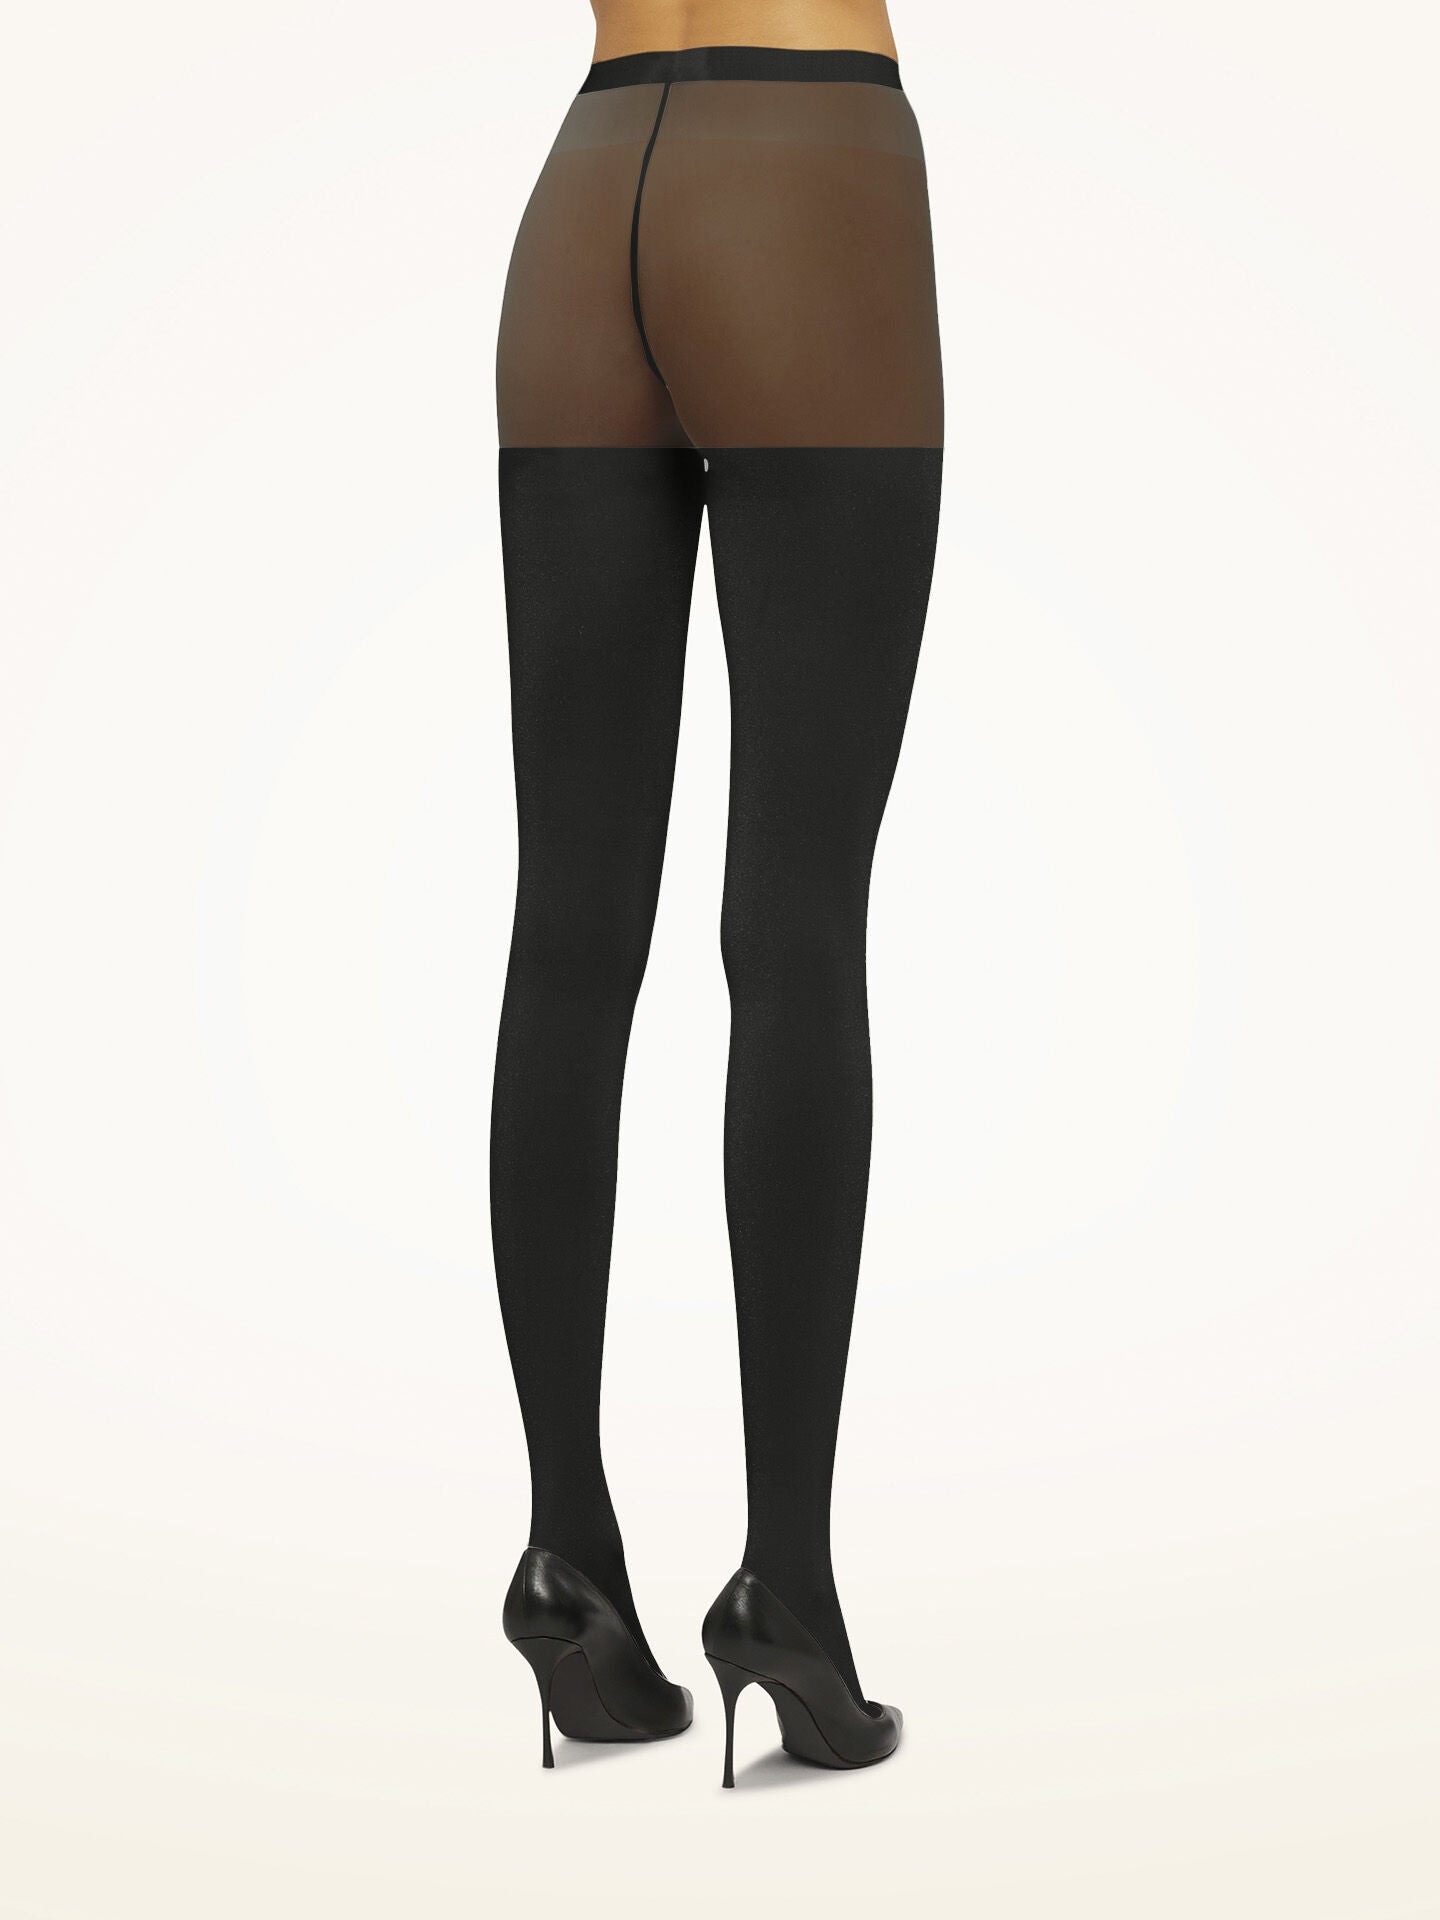 Wolford - Shiny Sheer Tights Black patterned